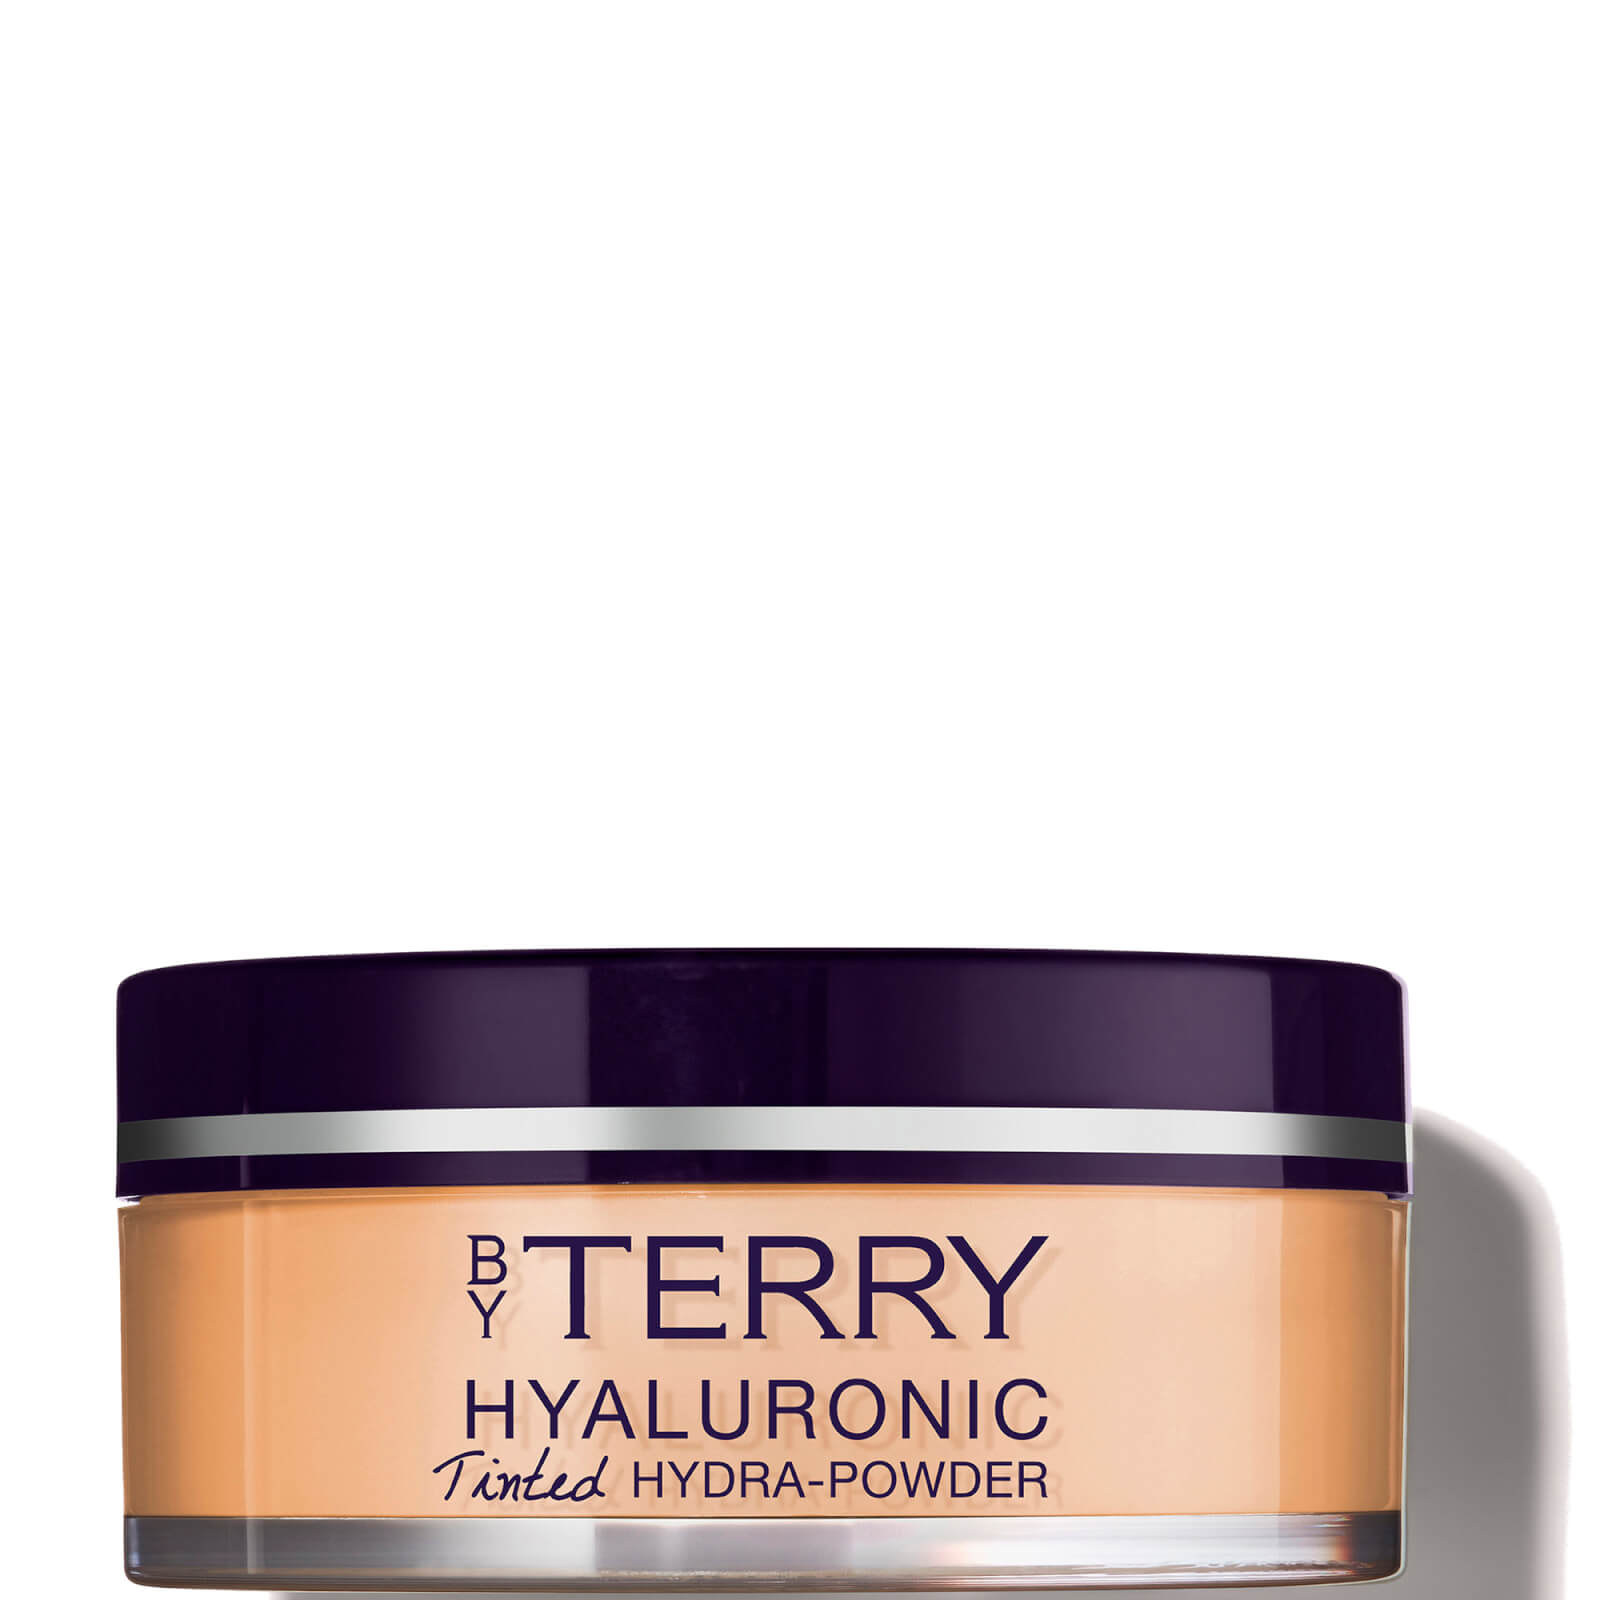 Image of By Terry Hyaluronic Tinted Hydra-Powder 10g (Various Shades) - N2. Apricot Light